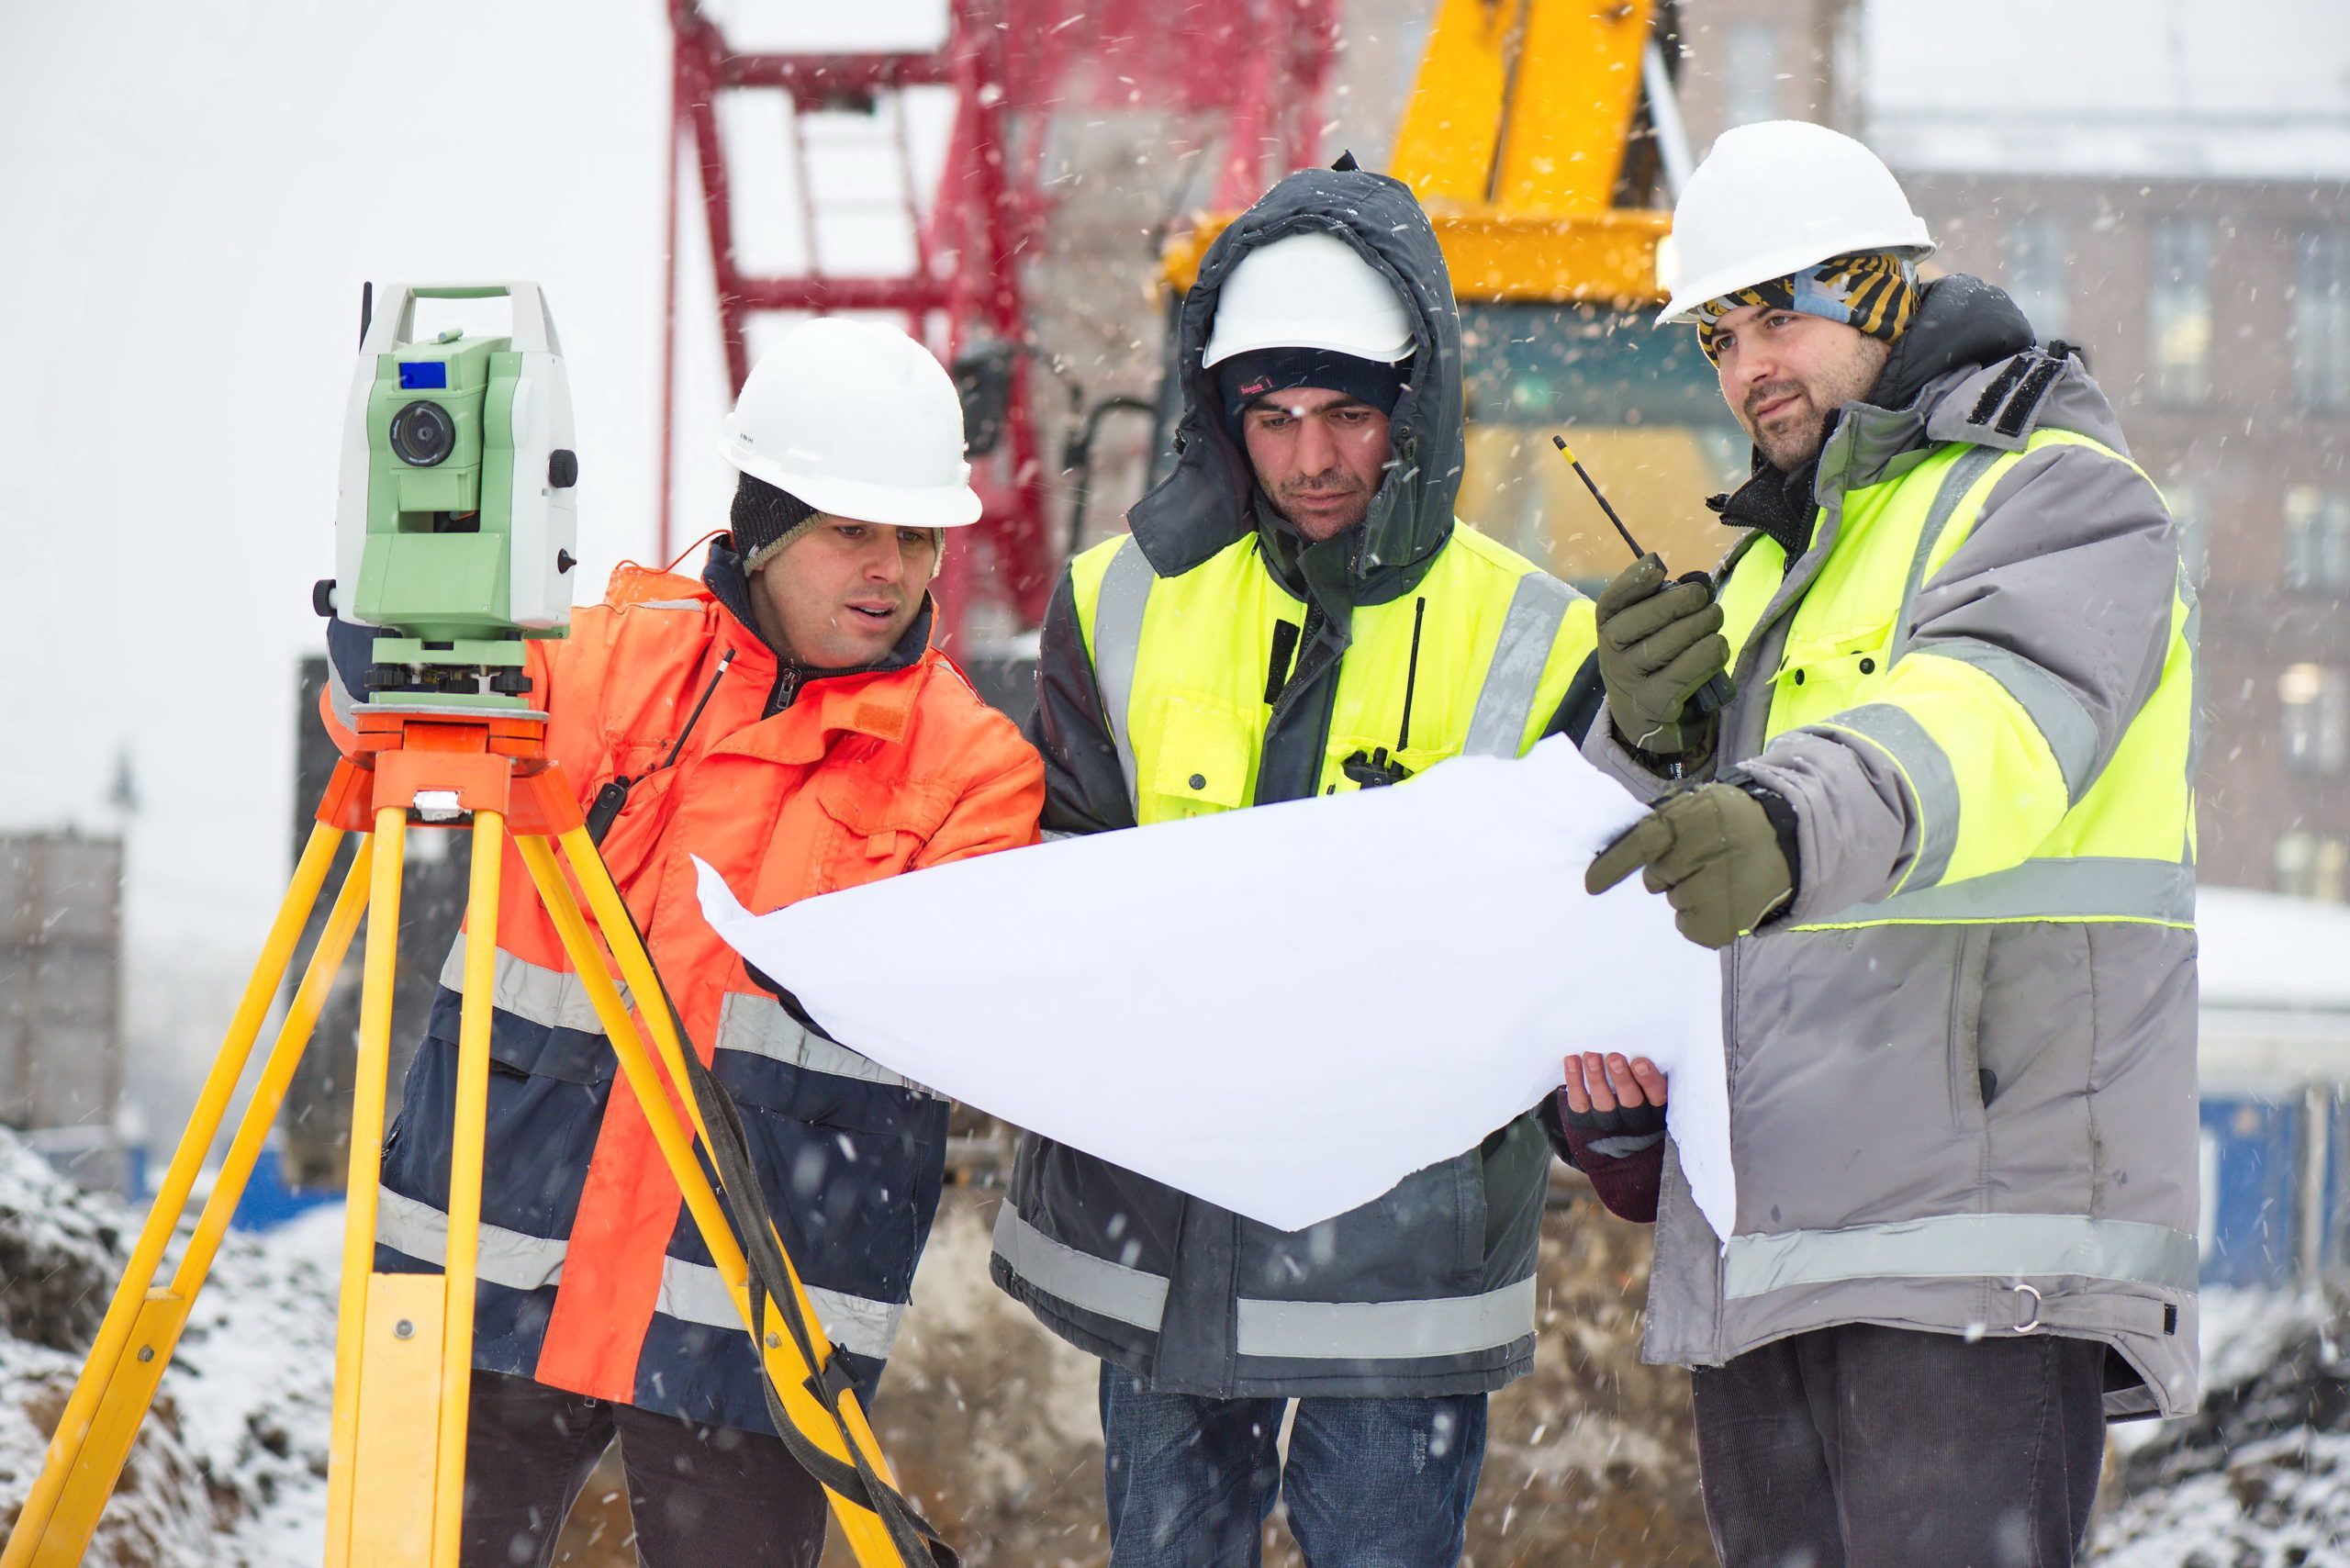 Building In Winter: Does Construction Slow Down in Winter?